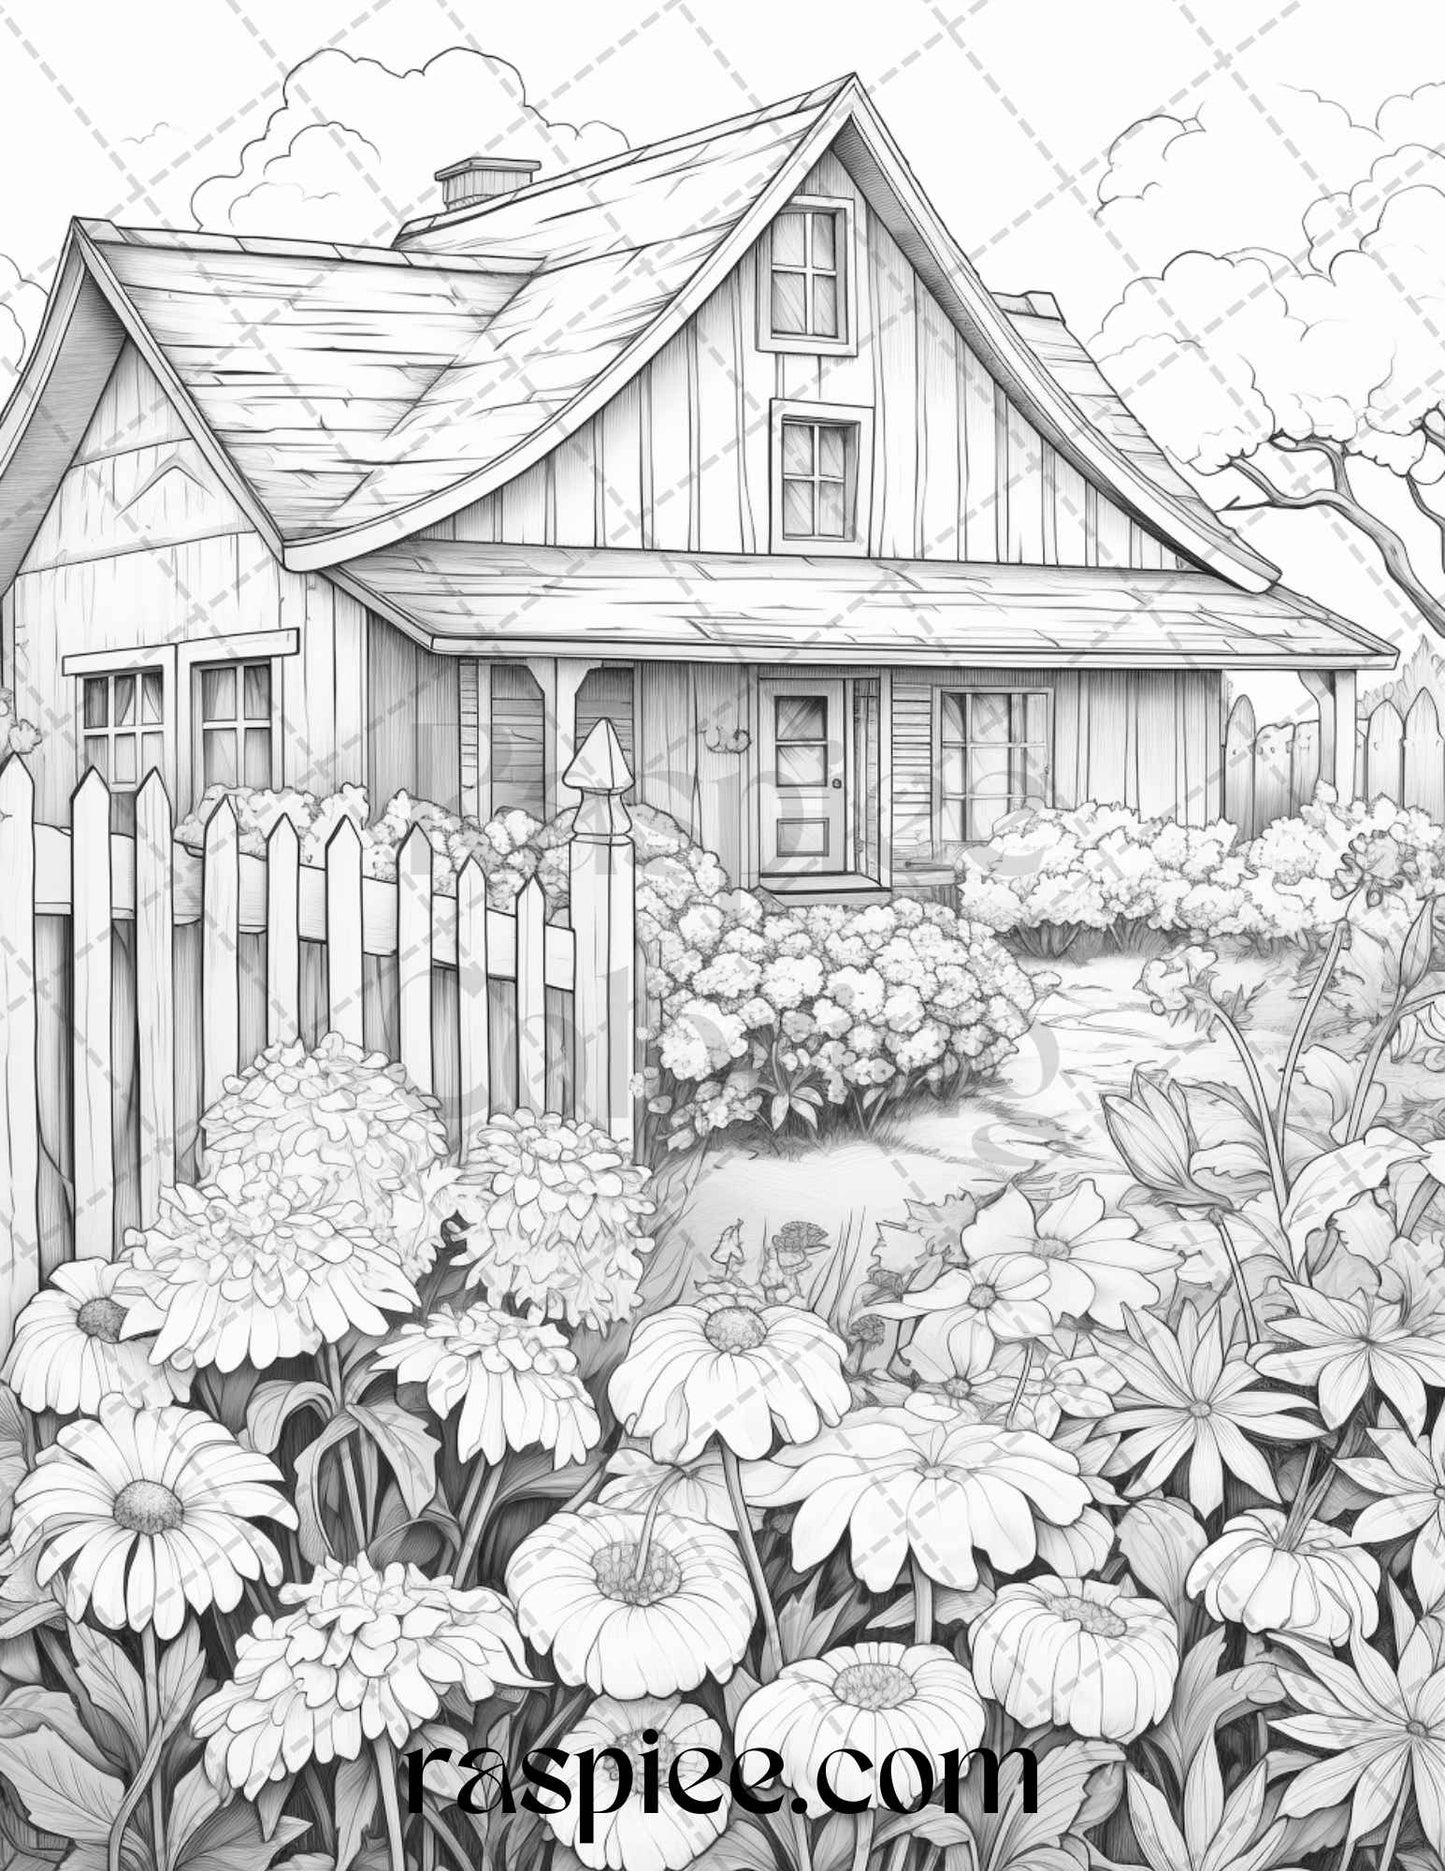 40 Farmstead Serenity Grayscale Coloring Pages Printable for Adults, PDF File Instant Download - raspiee